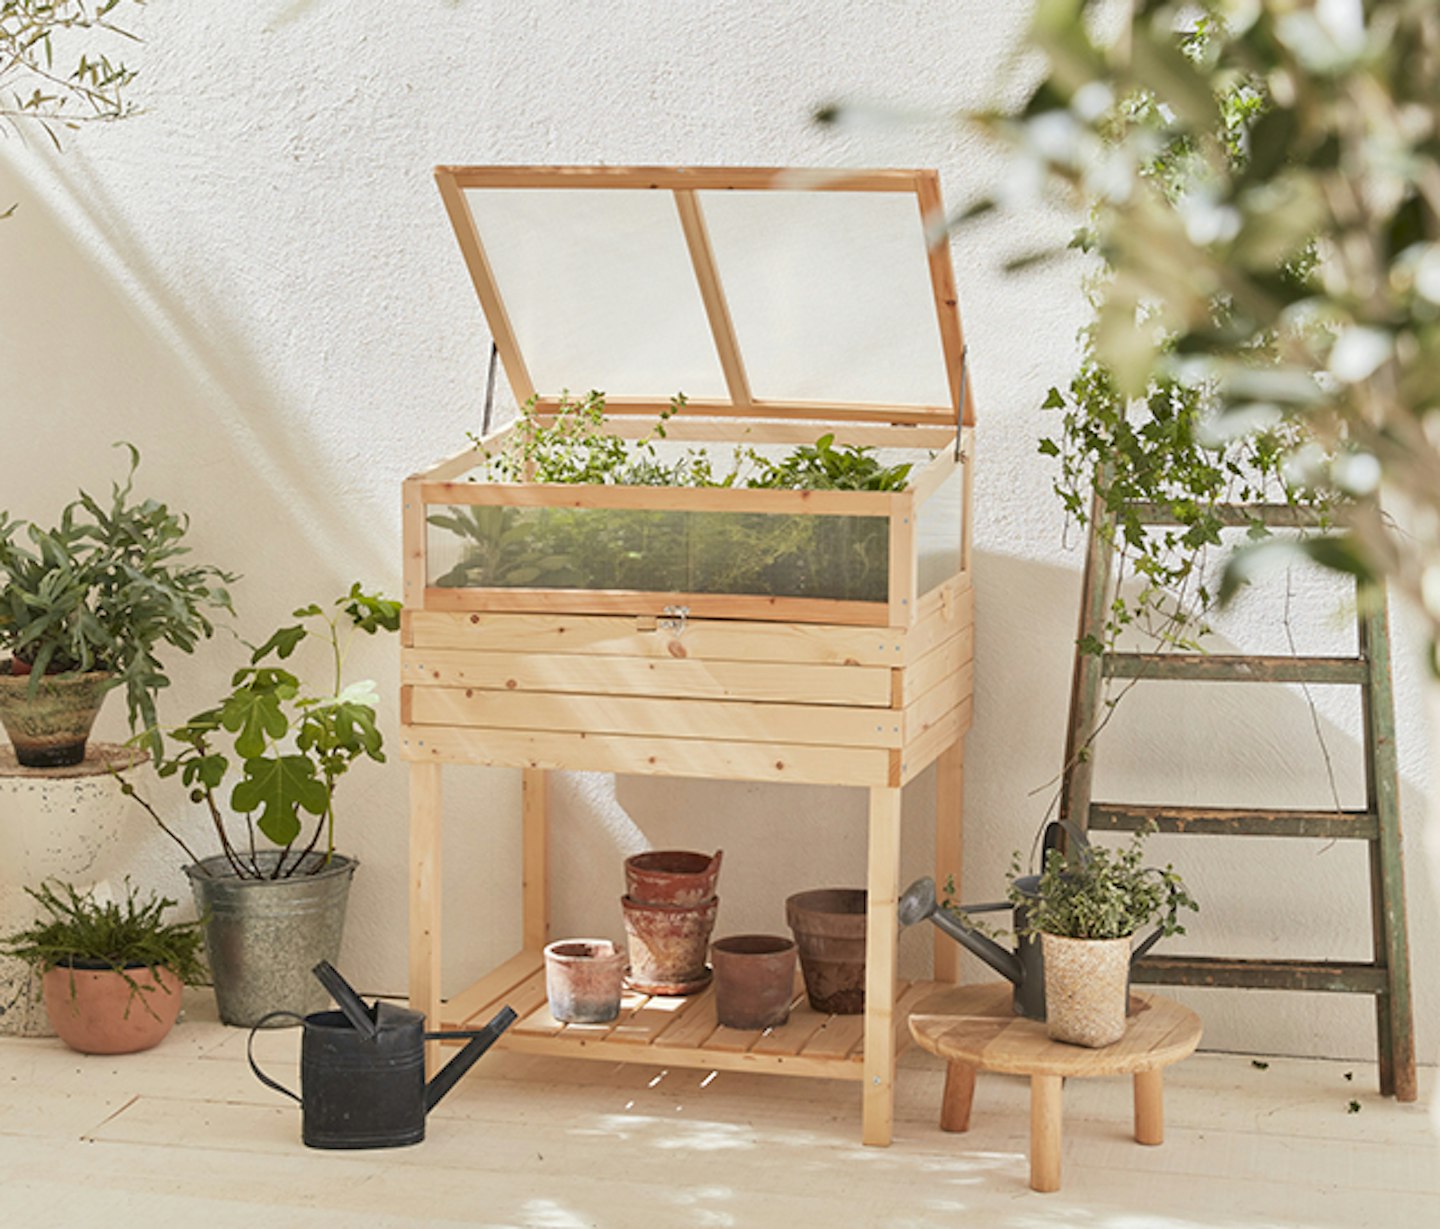 Wooden planter with removable greenhouse